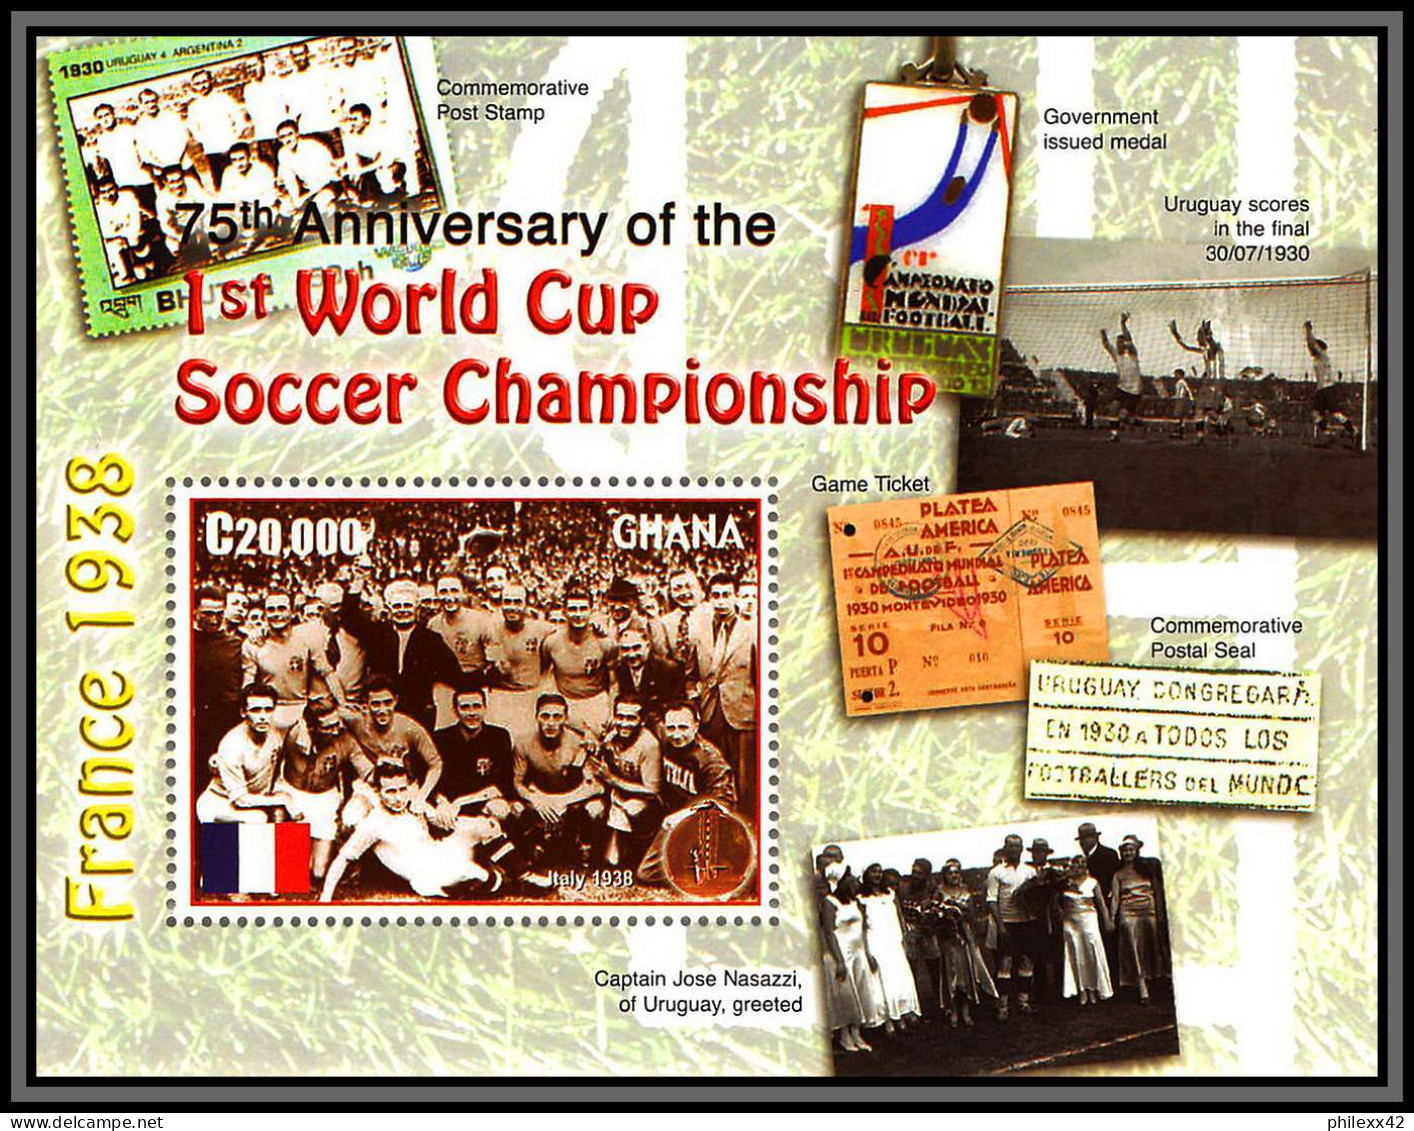 81239c Ghana N°468 75th Anniversary Of The 1rst World Cup Coupe Du Monde France 1938 ** MNH Football Soccer 2005 2 Blocs - 1938 – Francia